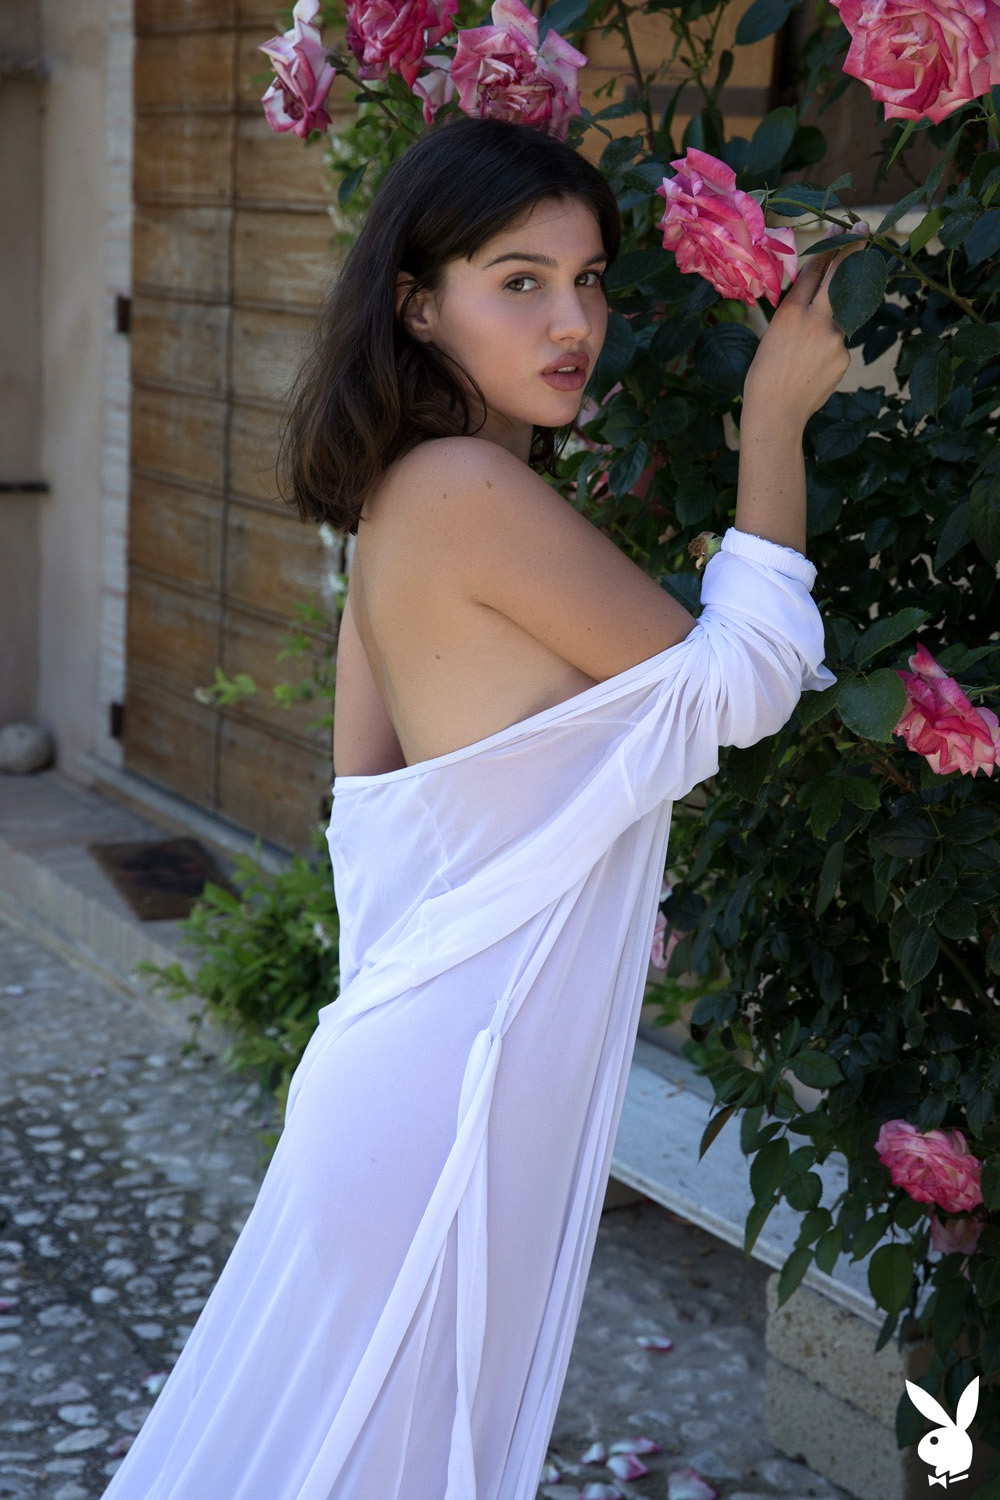 Laura Devushcat undresses outdoors surrounded by rose bushes